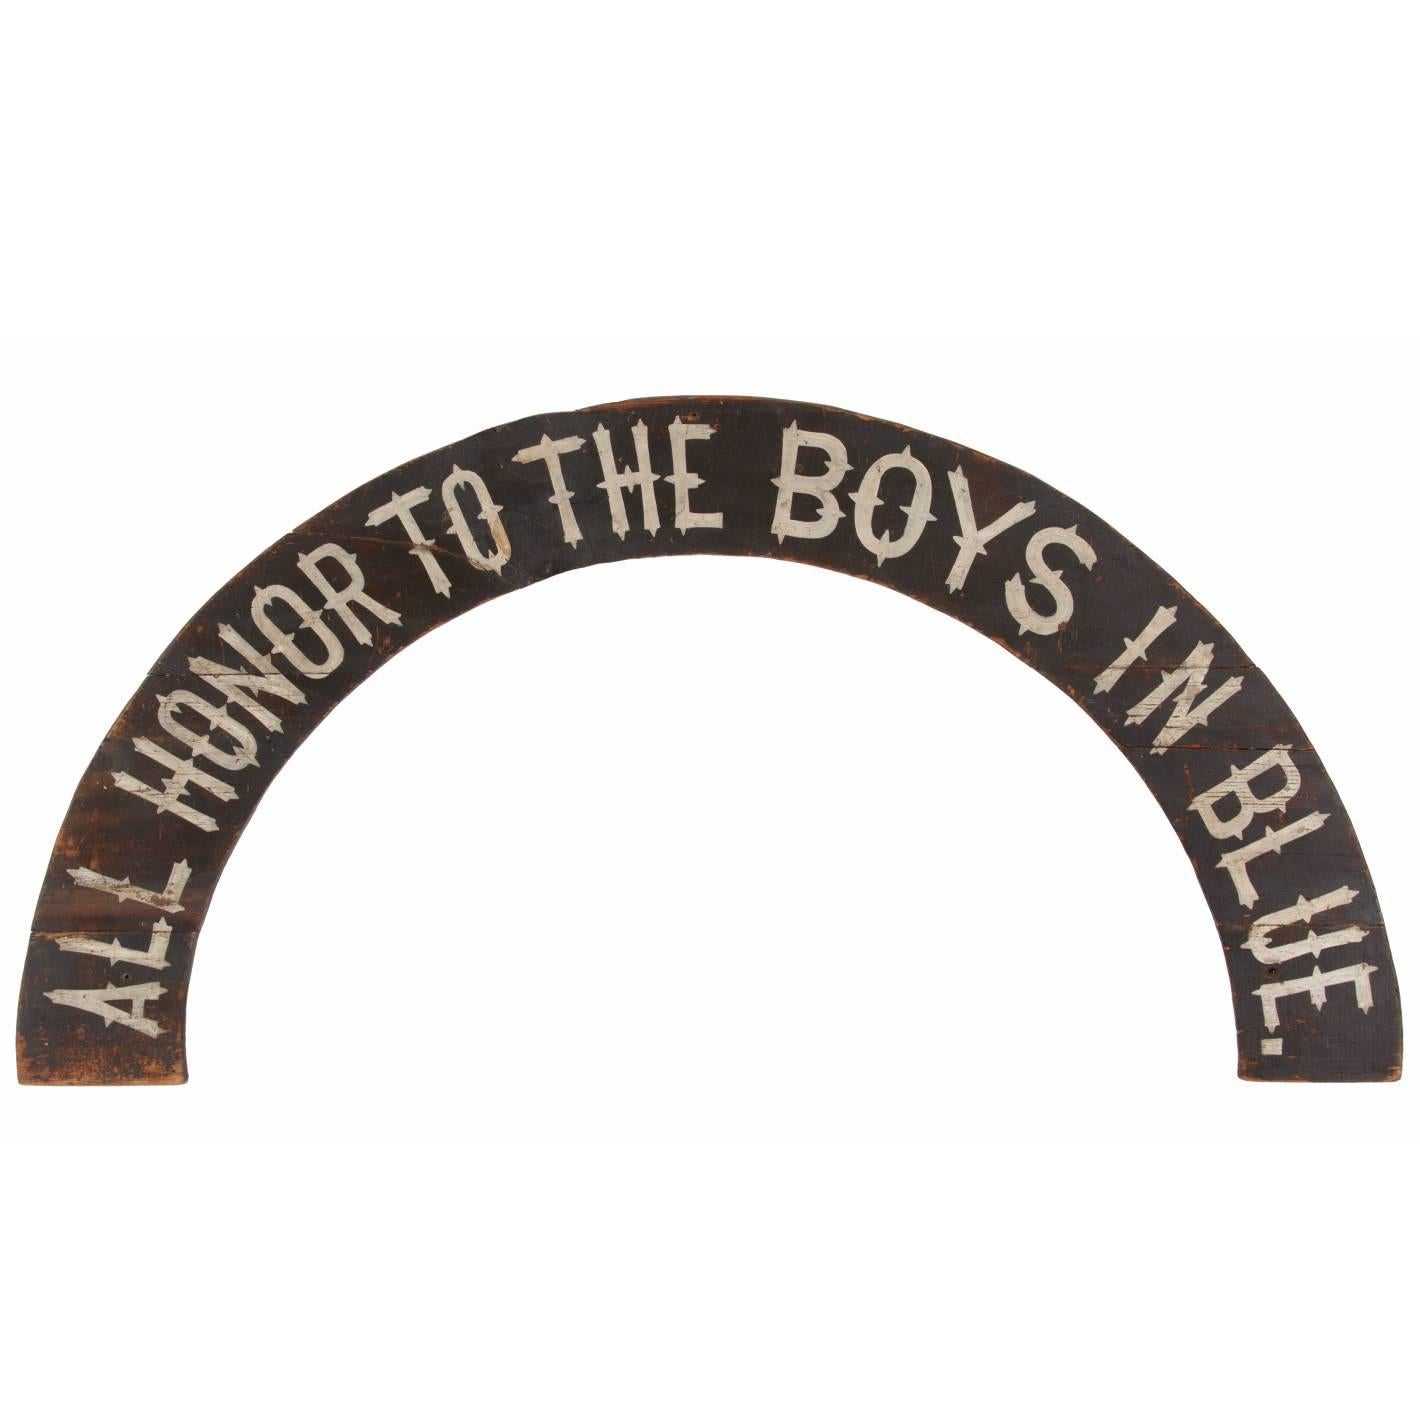 "All Honor To The Boys In Blue" Paint-Decorated American Sign, 1866-1880